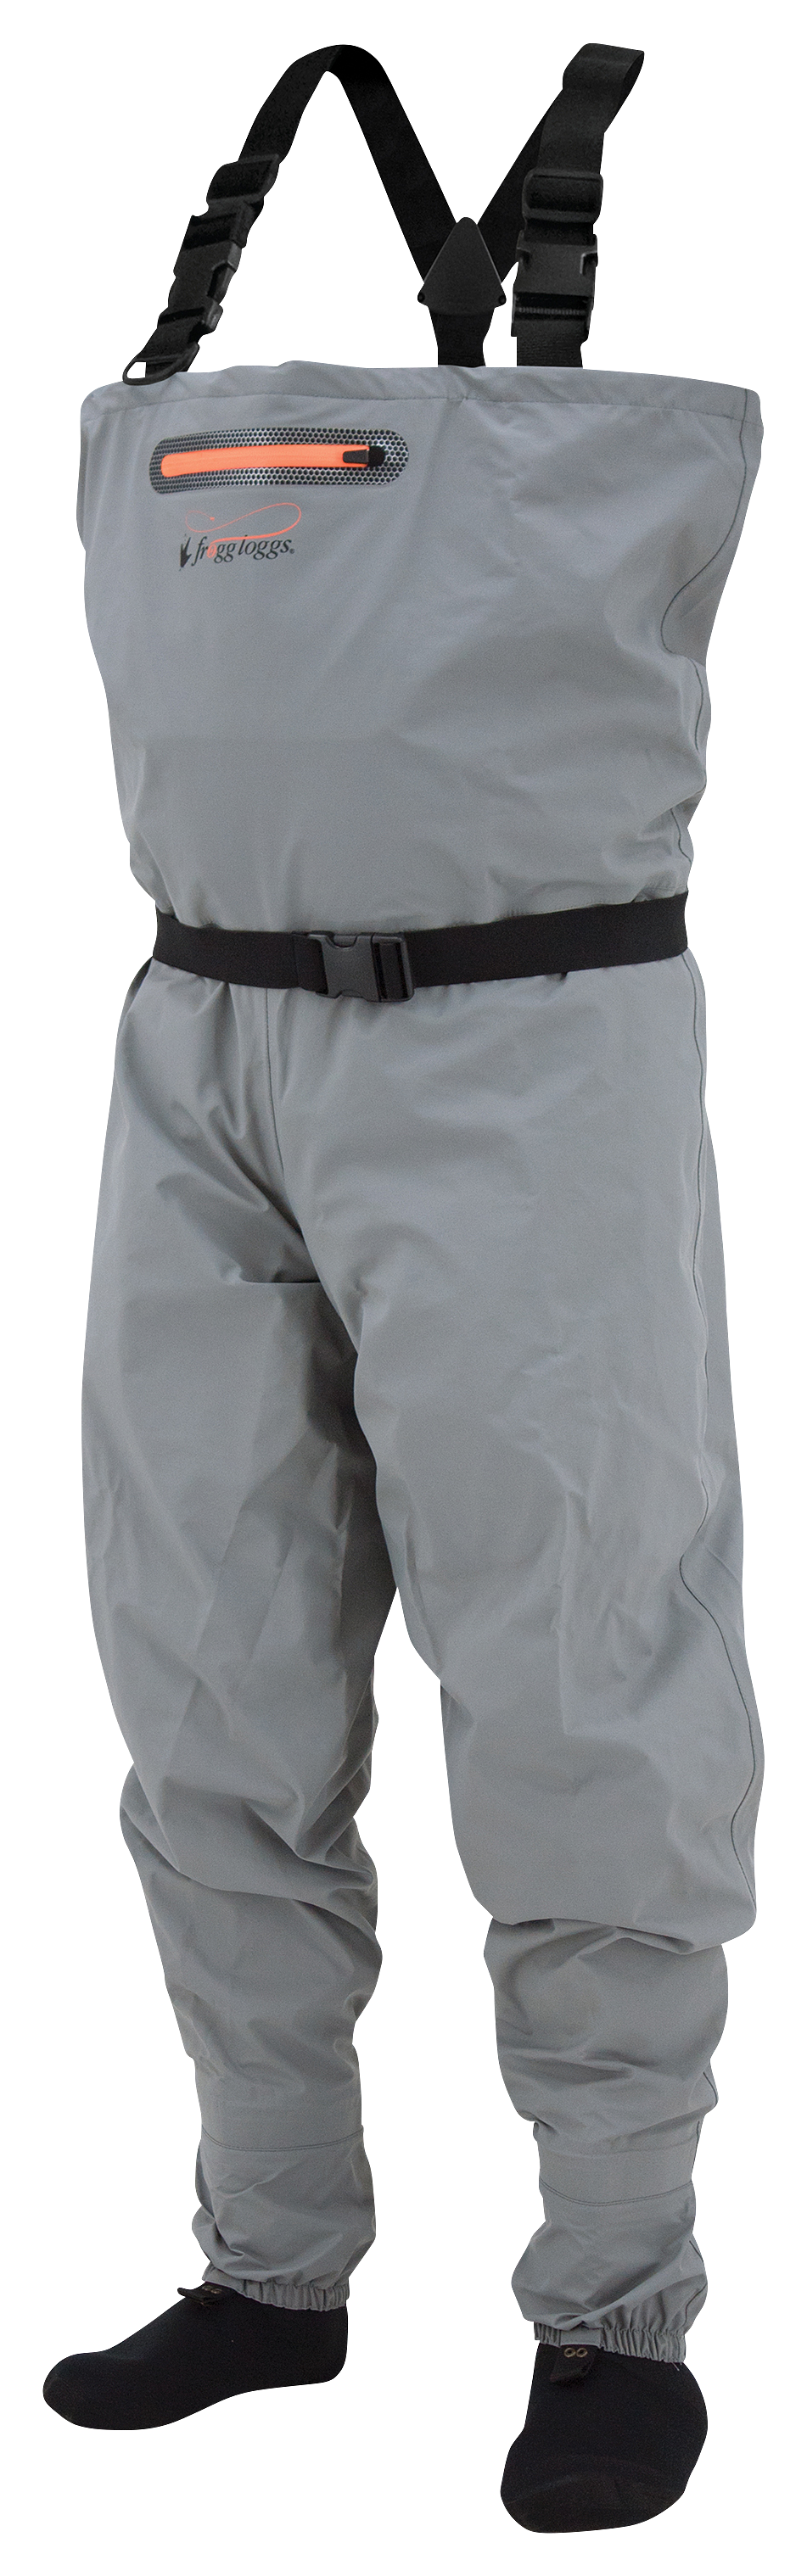 Frogg Toggs Canyon II Stockingfoot Chest Waders for Men - XXL